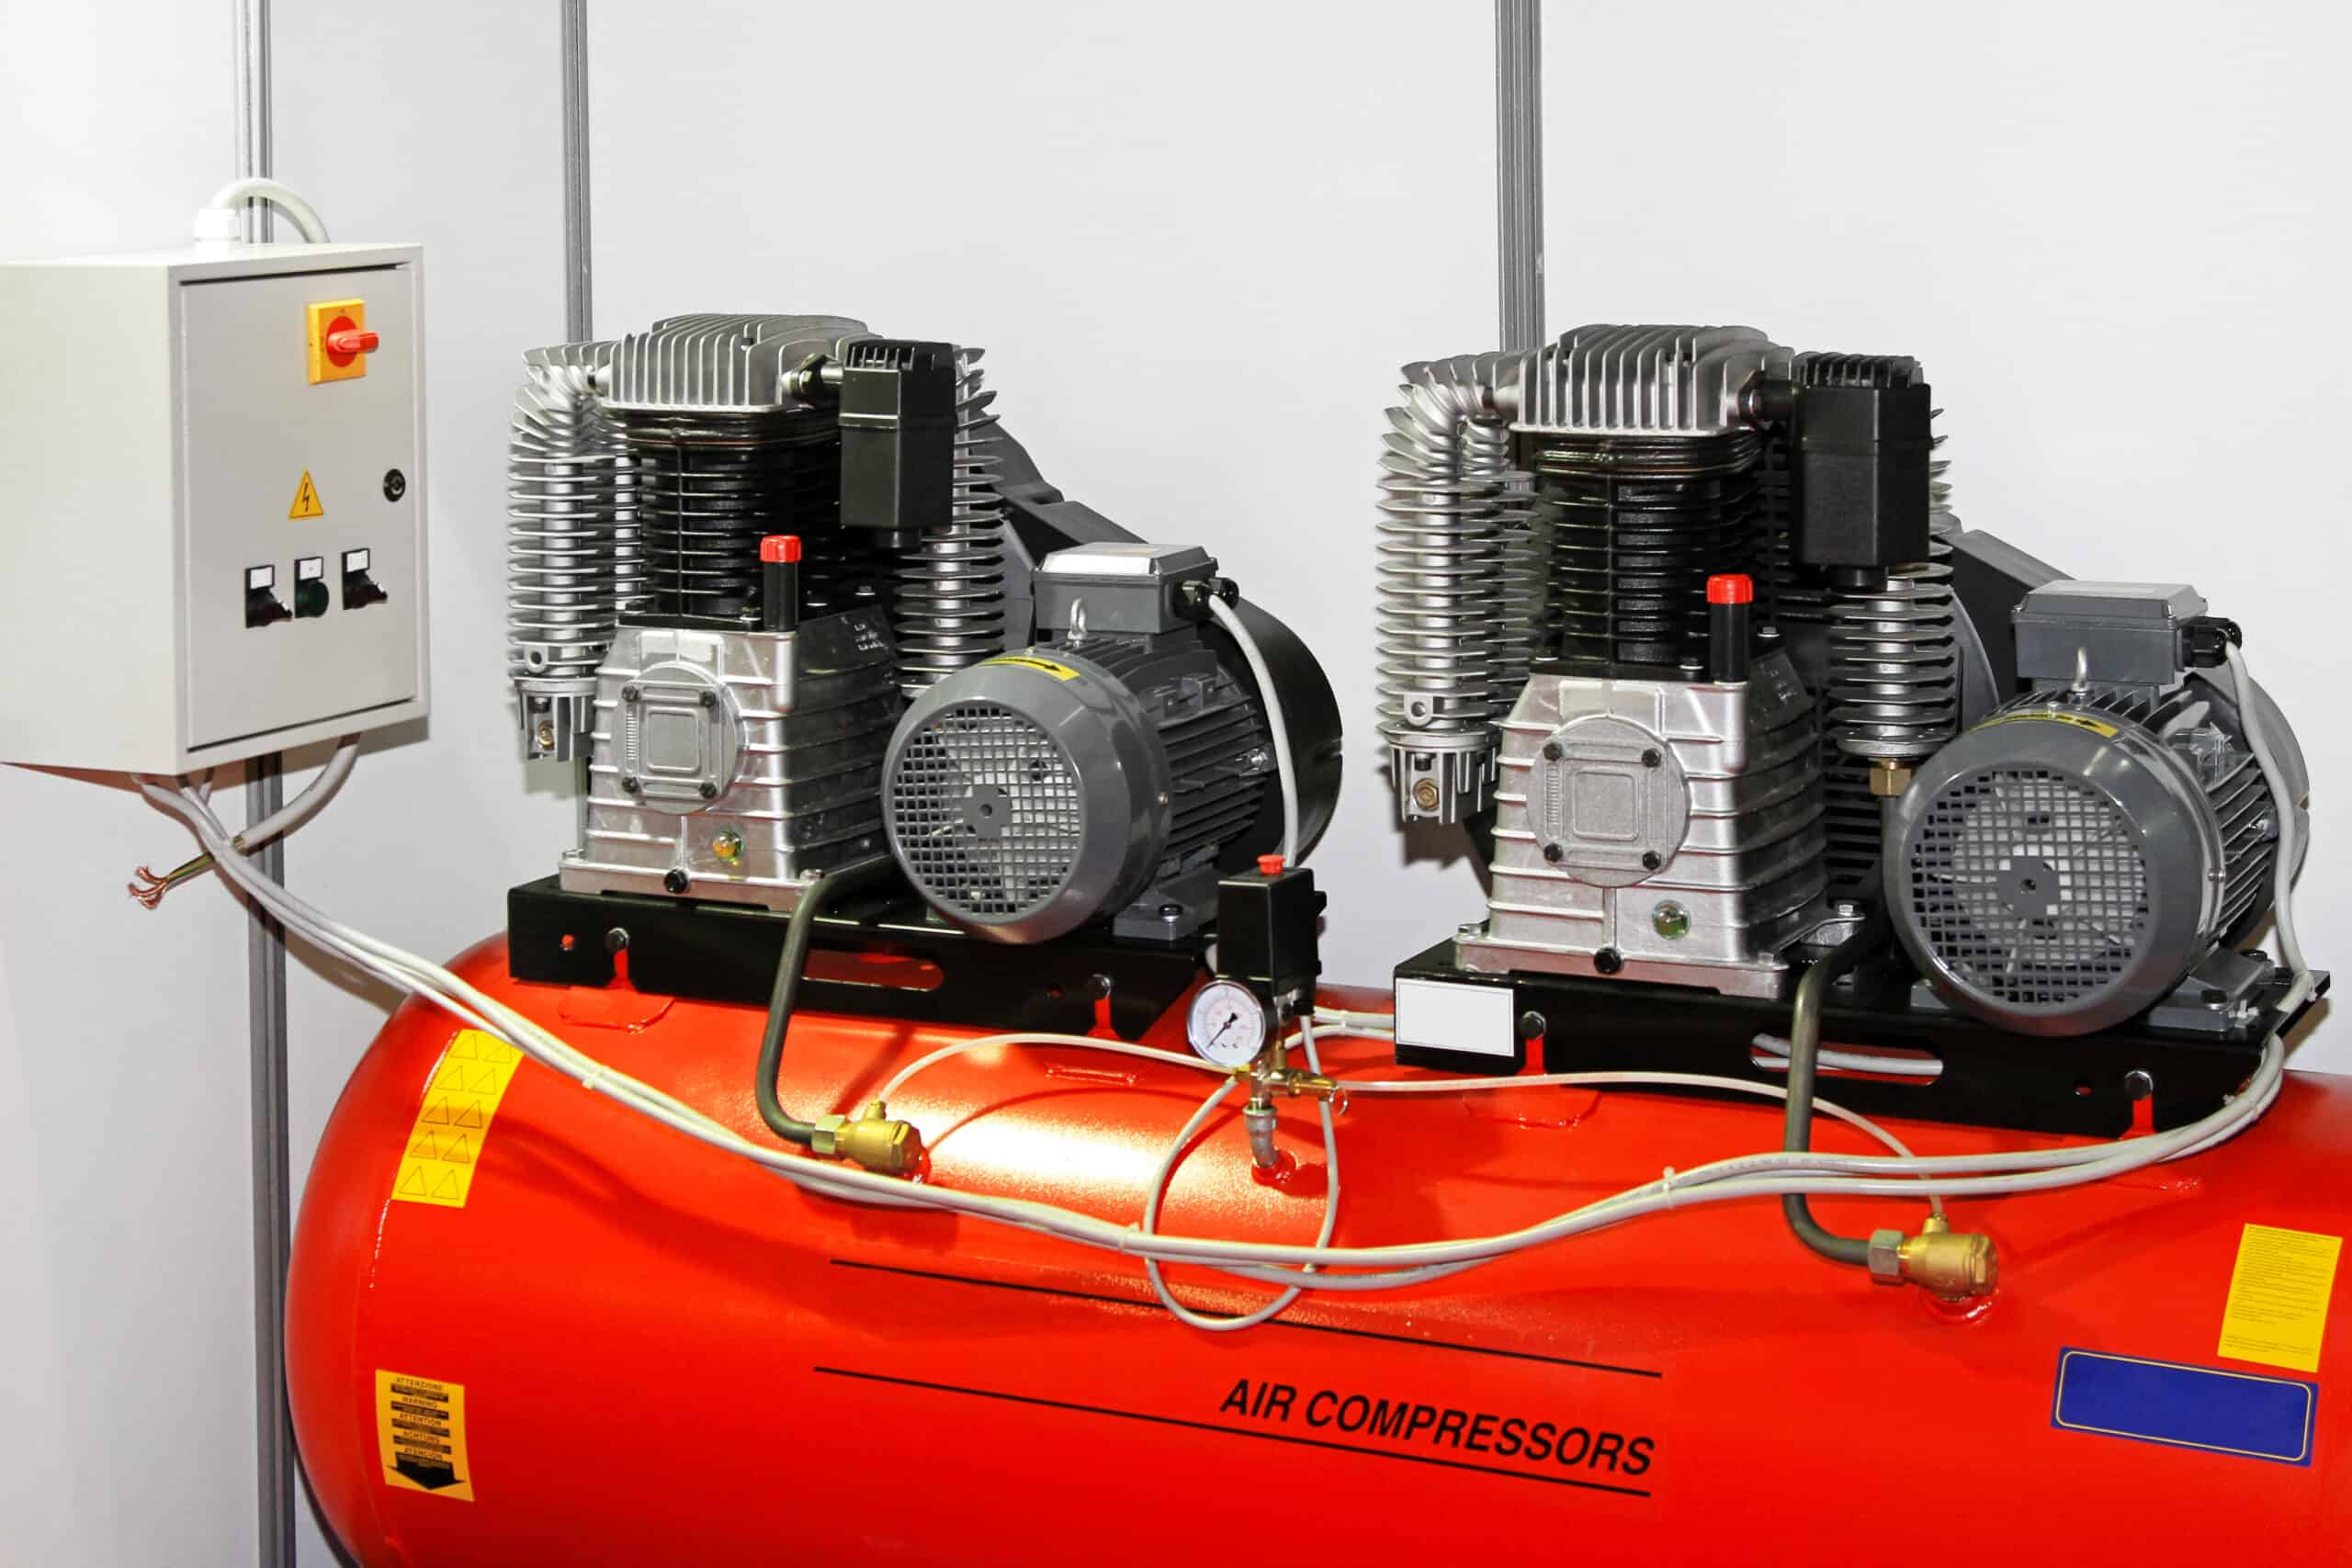 Can You Fill Scuba Tanks with an Air Compressor?